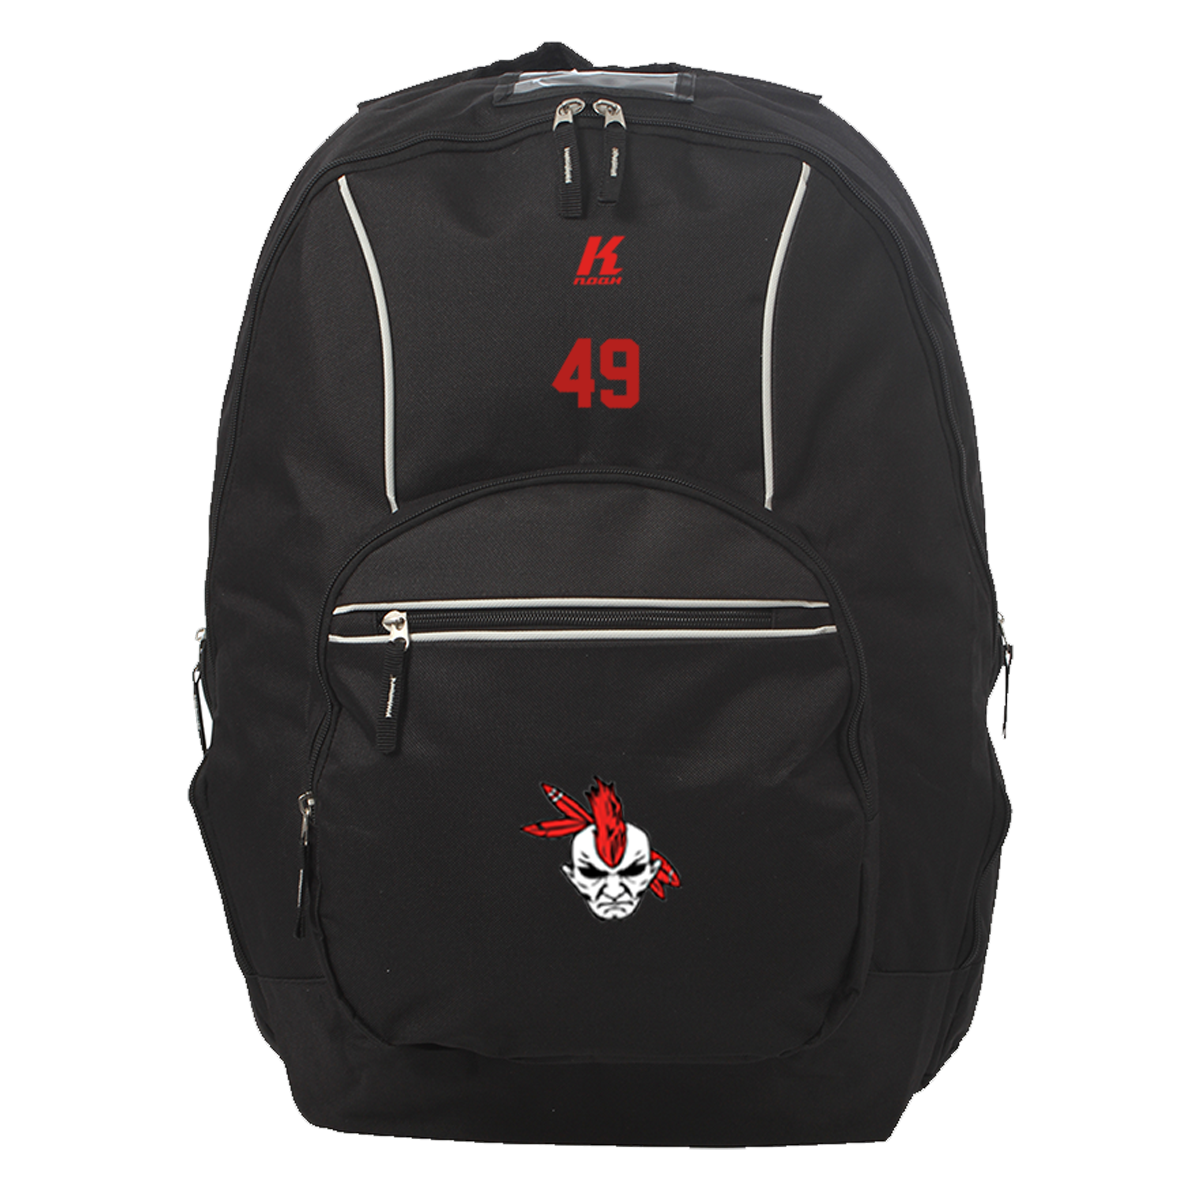 Warriors Heritage Backpack with Playernumber or Initials